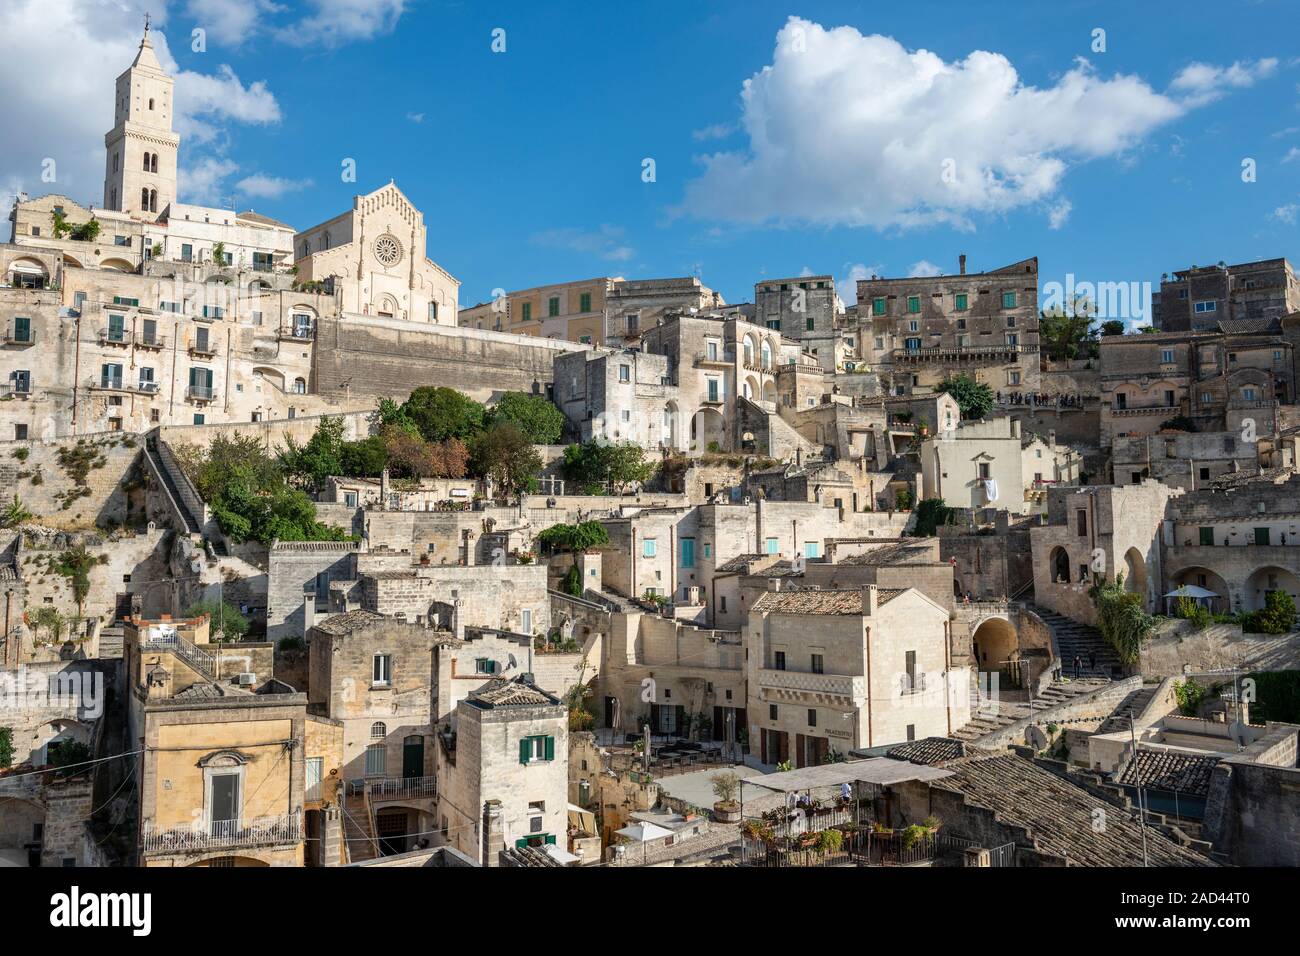 General view across Sasso Barisano with cathedral tower in distance - Sassi District of Matera, Basilicata Region, Southern Italy Stock Photo